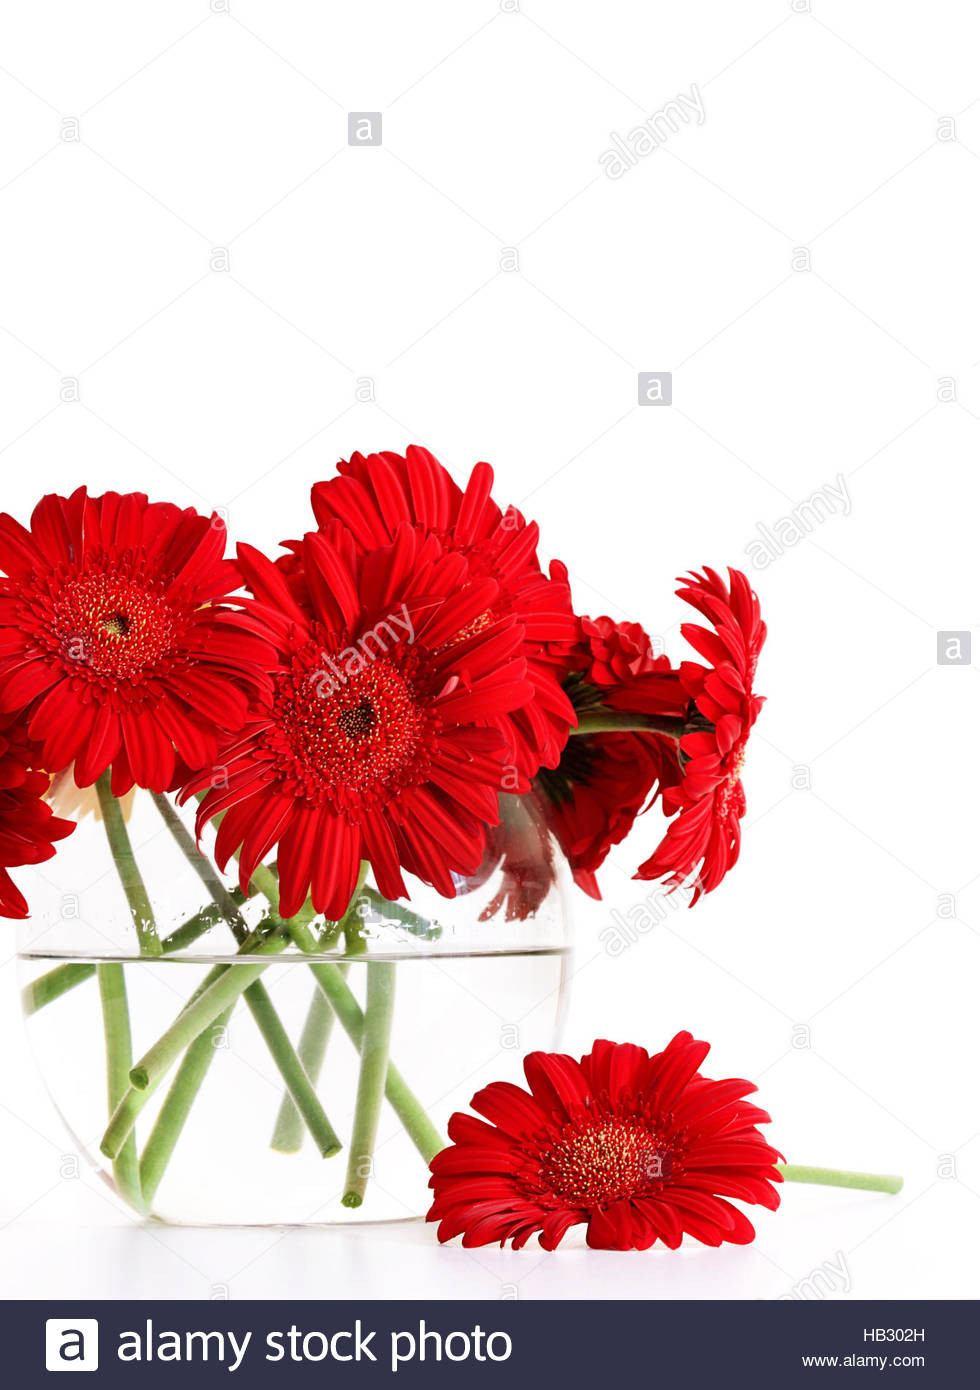 22 Lovely Tall Fluted Glass Vase 2024 free download tall fluted glass vase of red glass vase pics lovely tall vase centerpiece ideas vases flowers with red glass vase pics closeup od red gerber daisies in glass vase stock of red glass